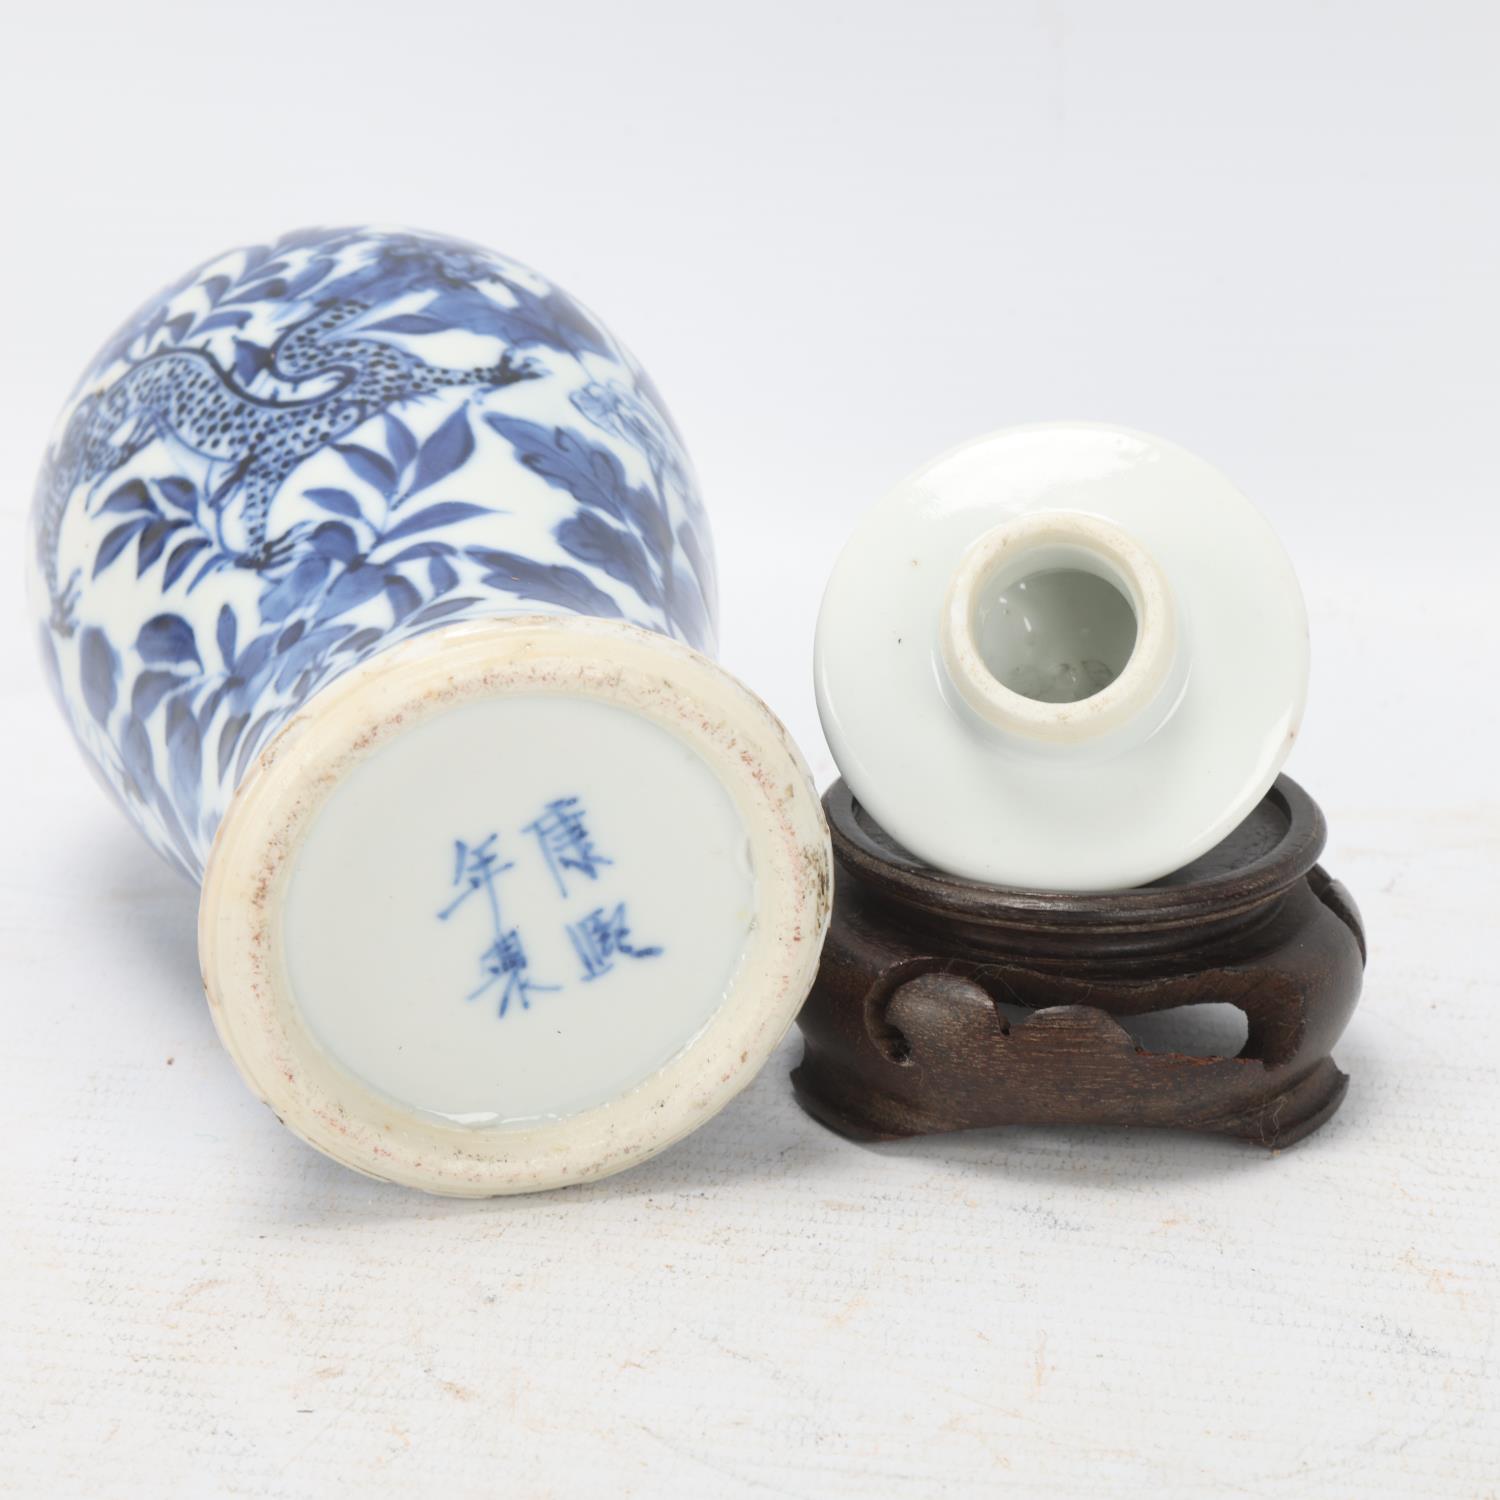 Chinese blue and white porcelain jar and cover, dragon decoration, 4-character mark, overall - Image 2 of 3